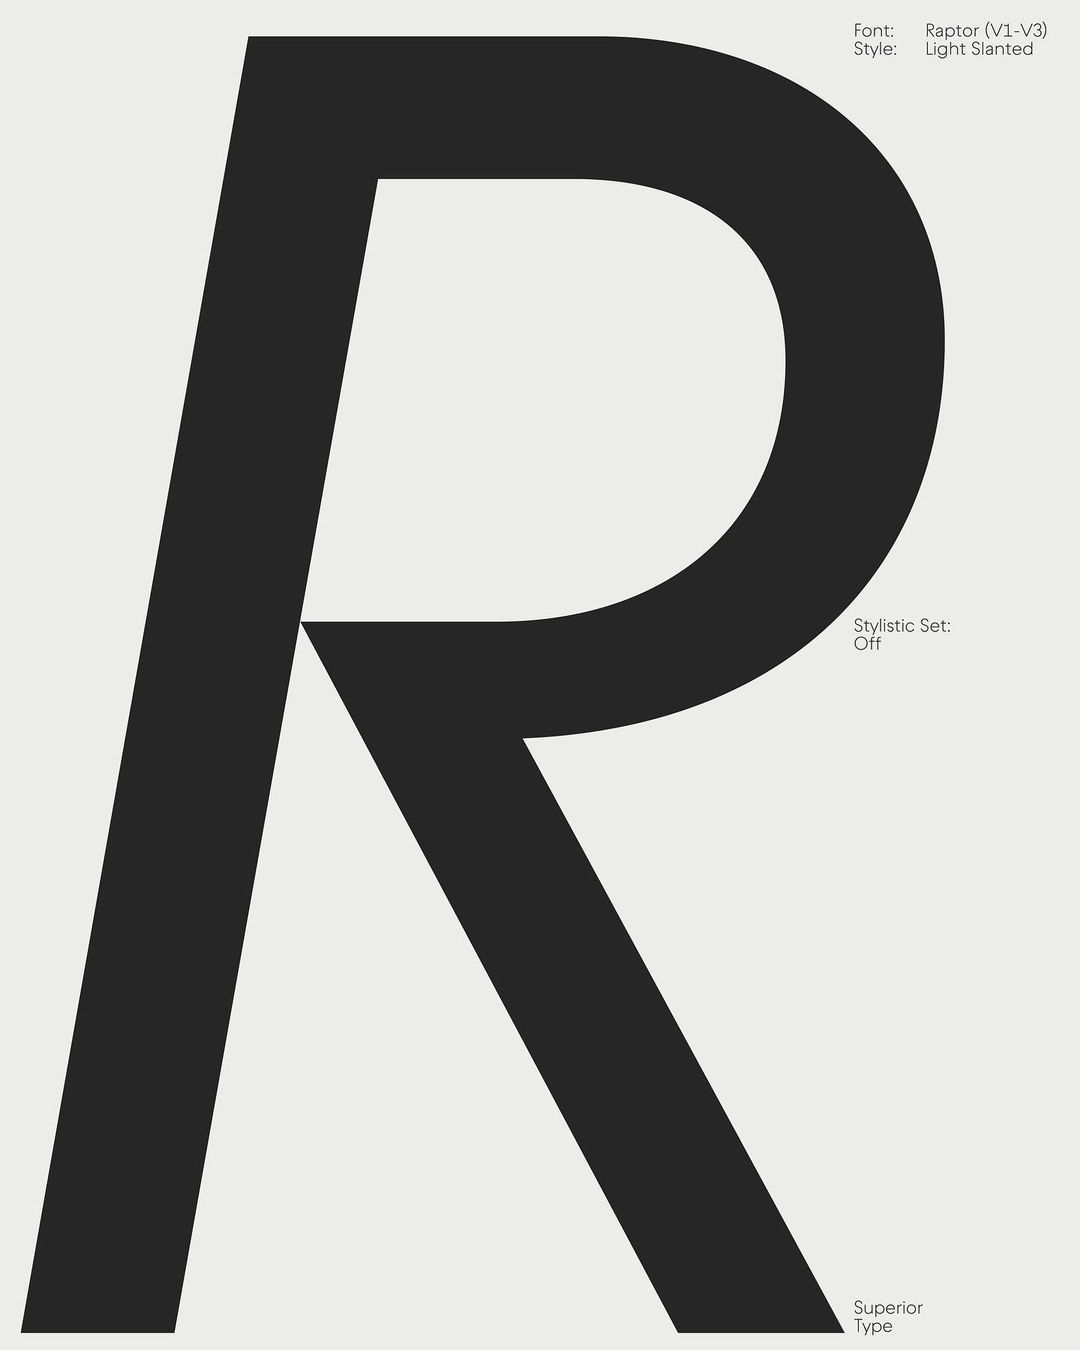 Rapter Font by Superior Type